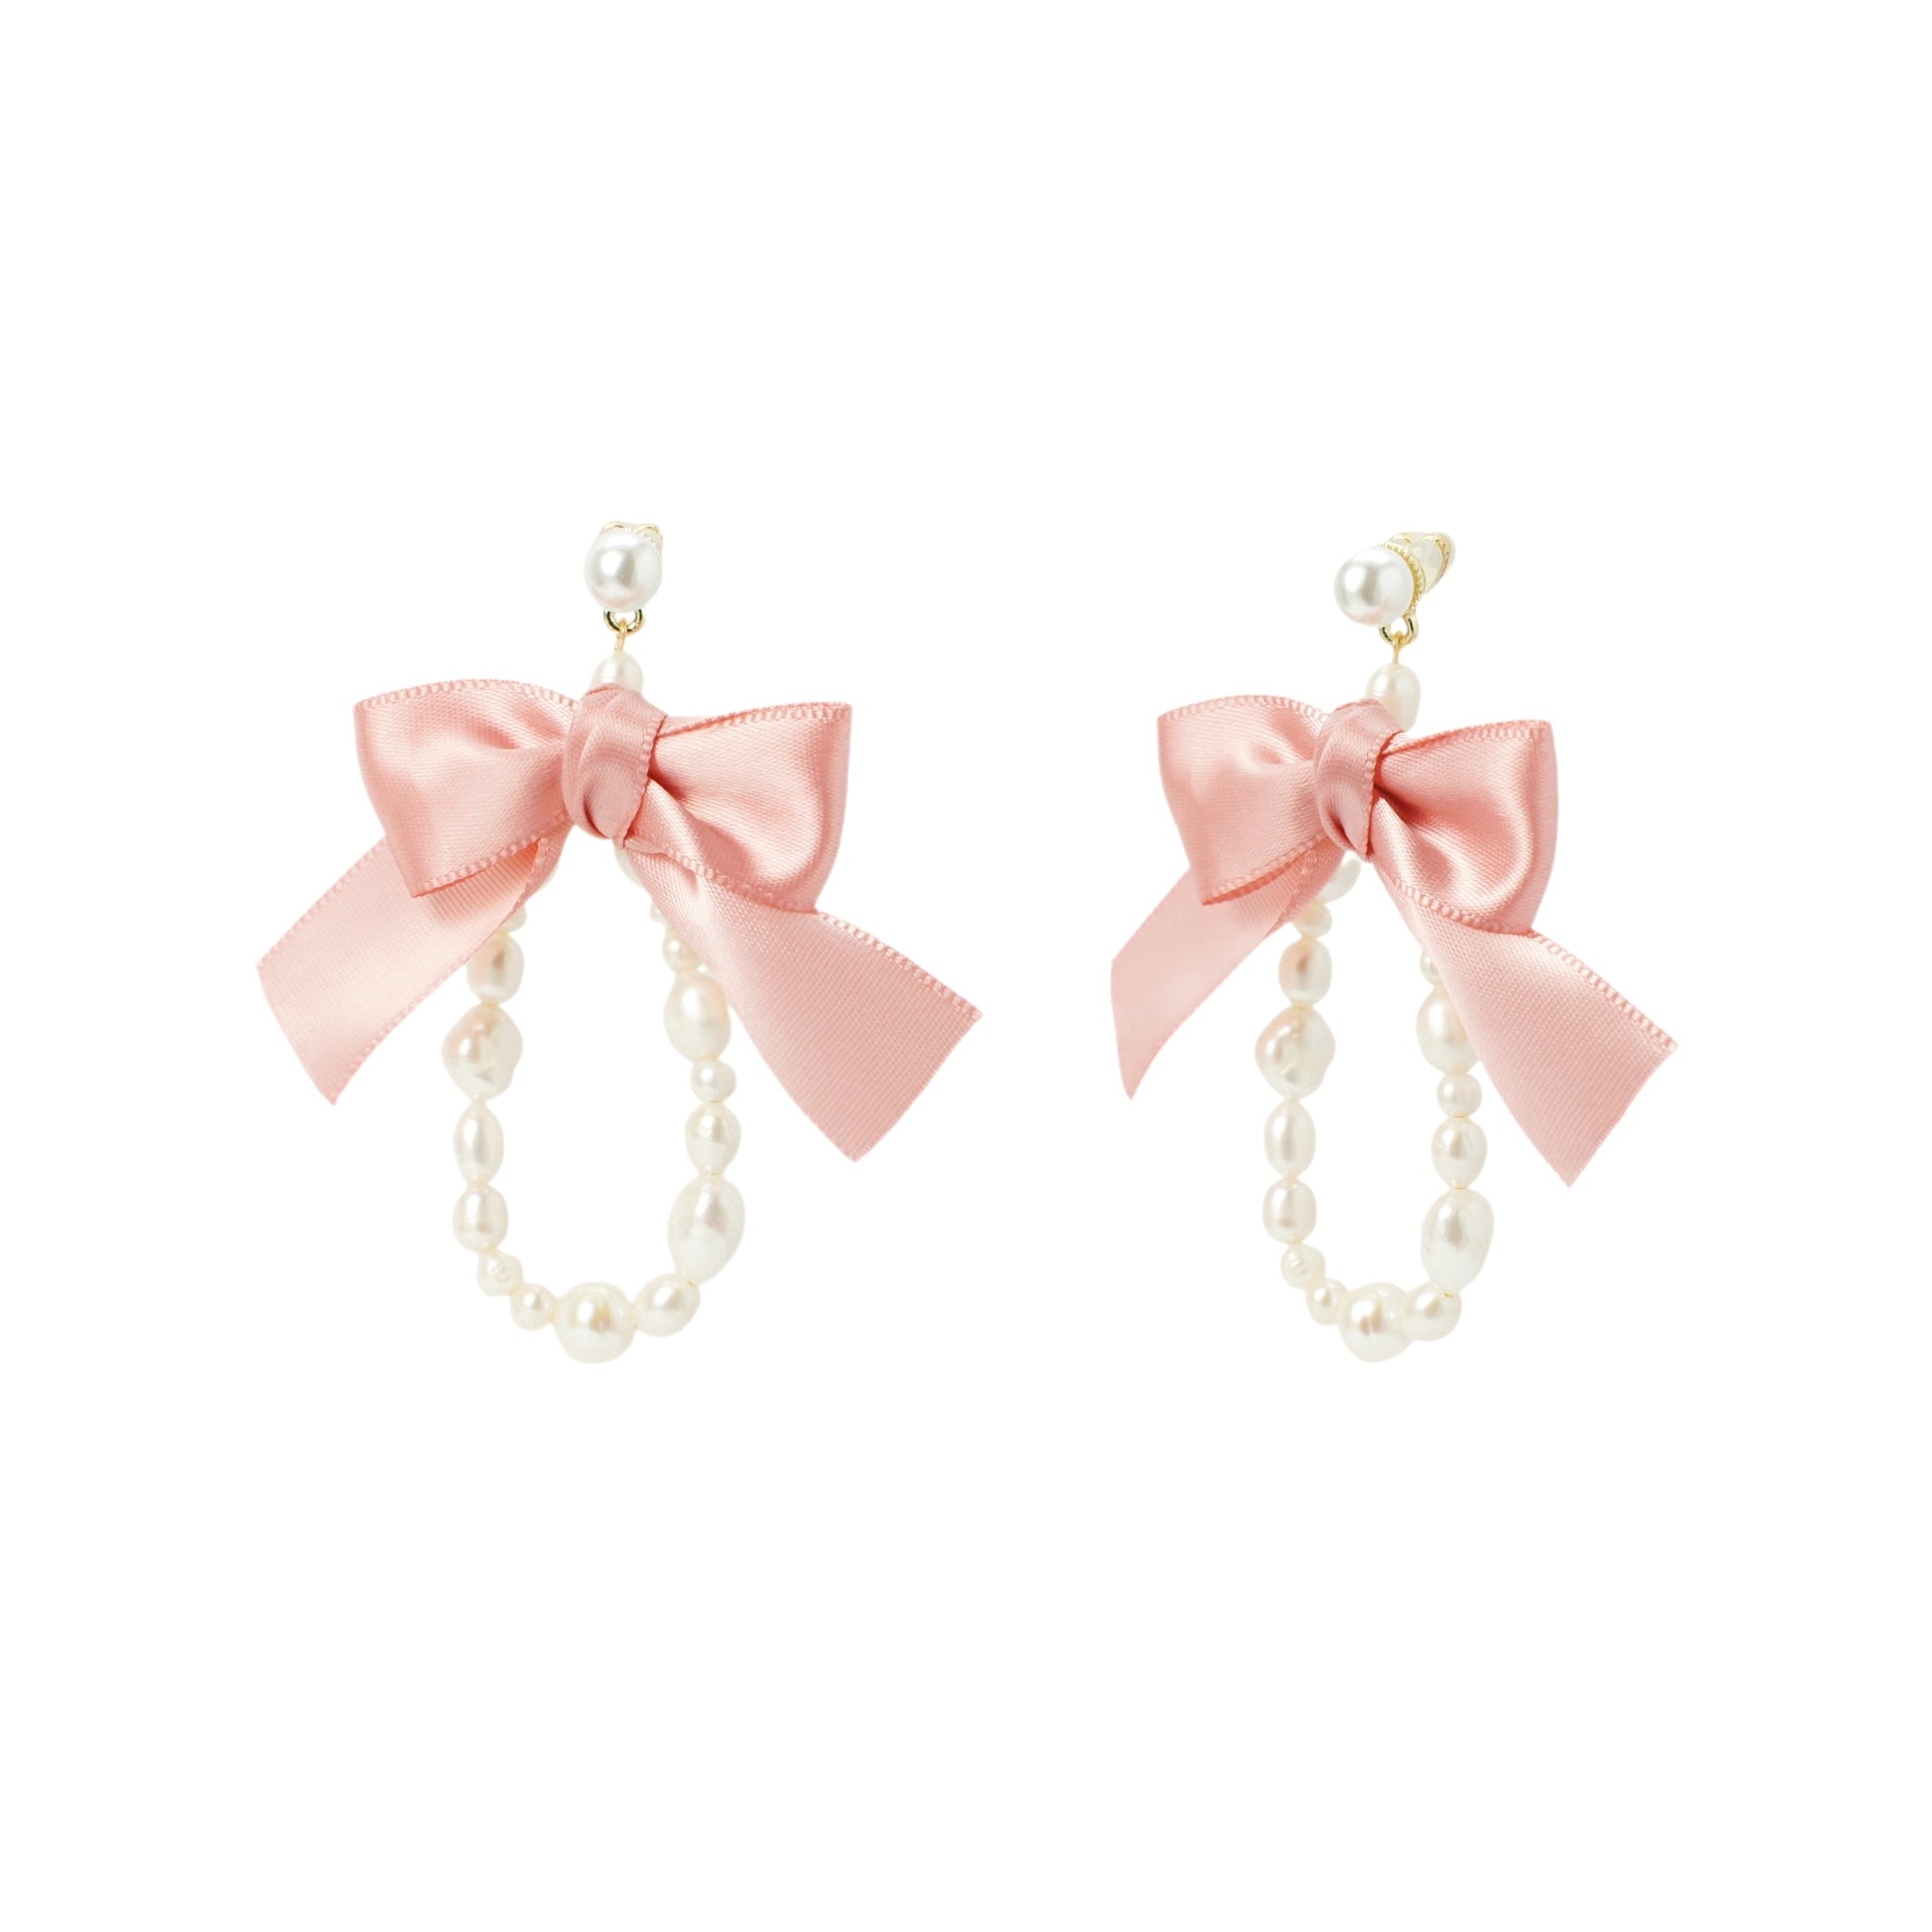 Pink Ribbon Bow and Golden Links Earrings – I'MMANY London